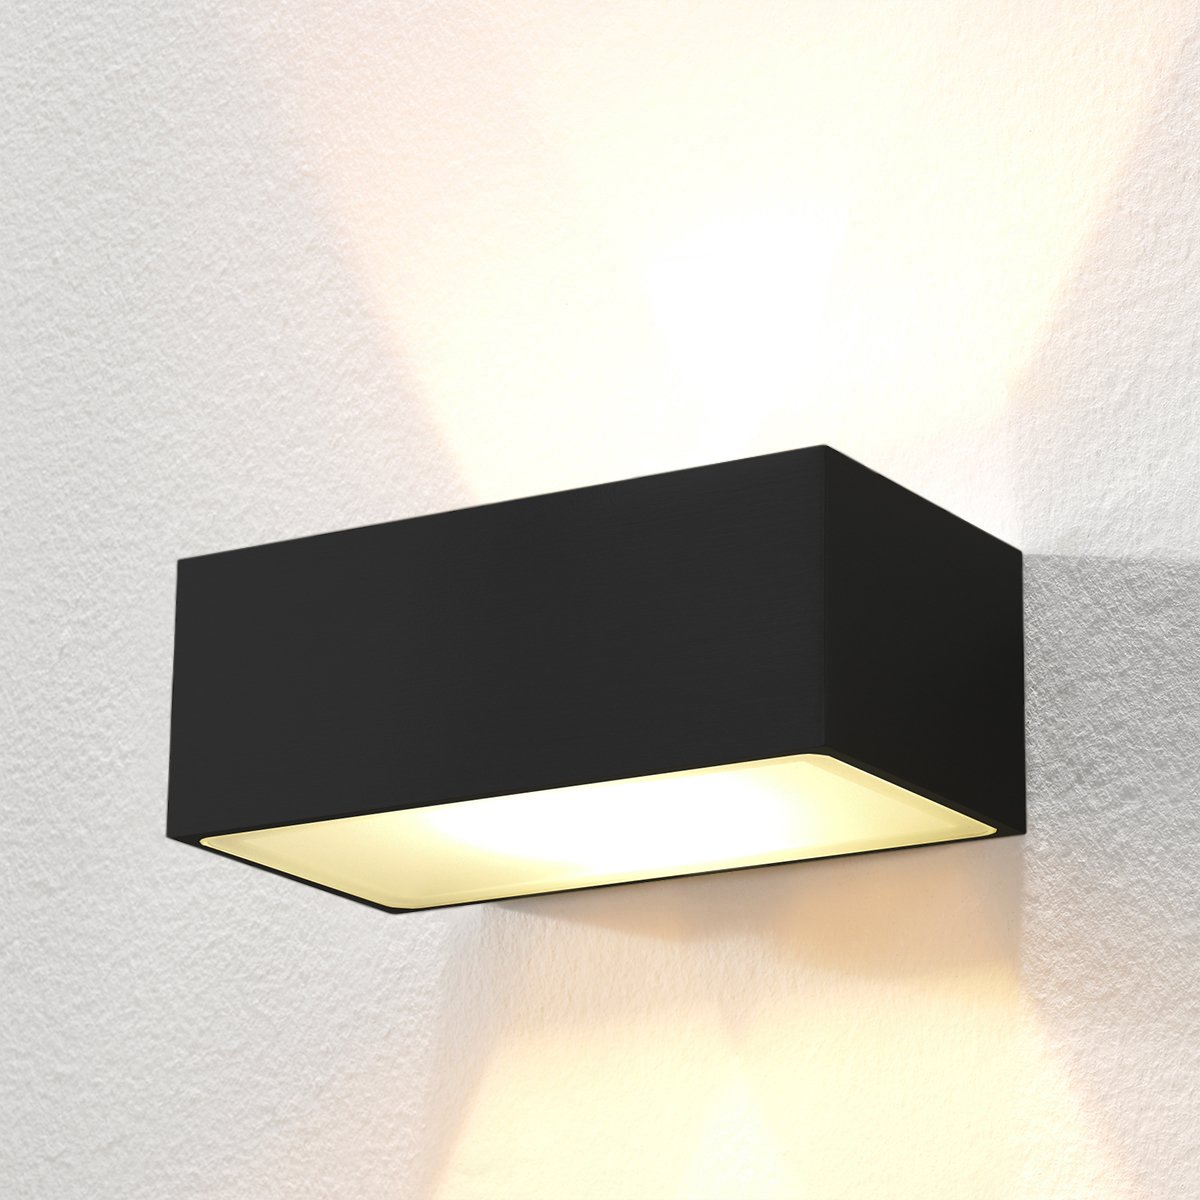 Wall lamp Up Down coated black Ayas - 18.2 cm